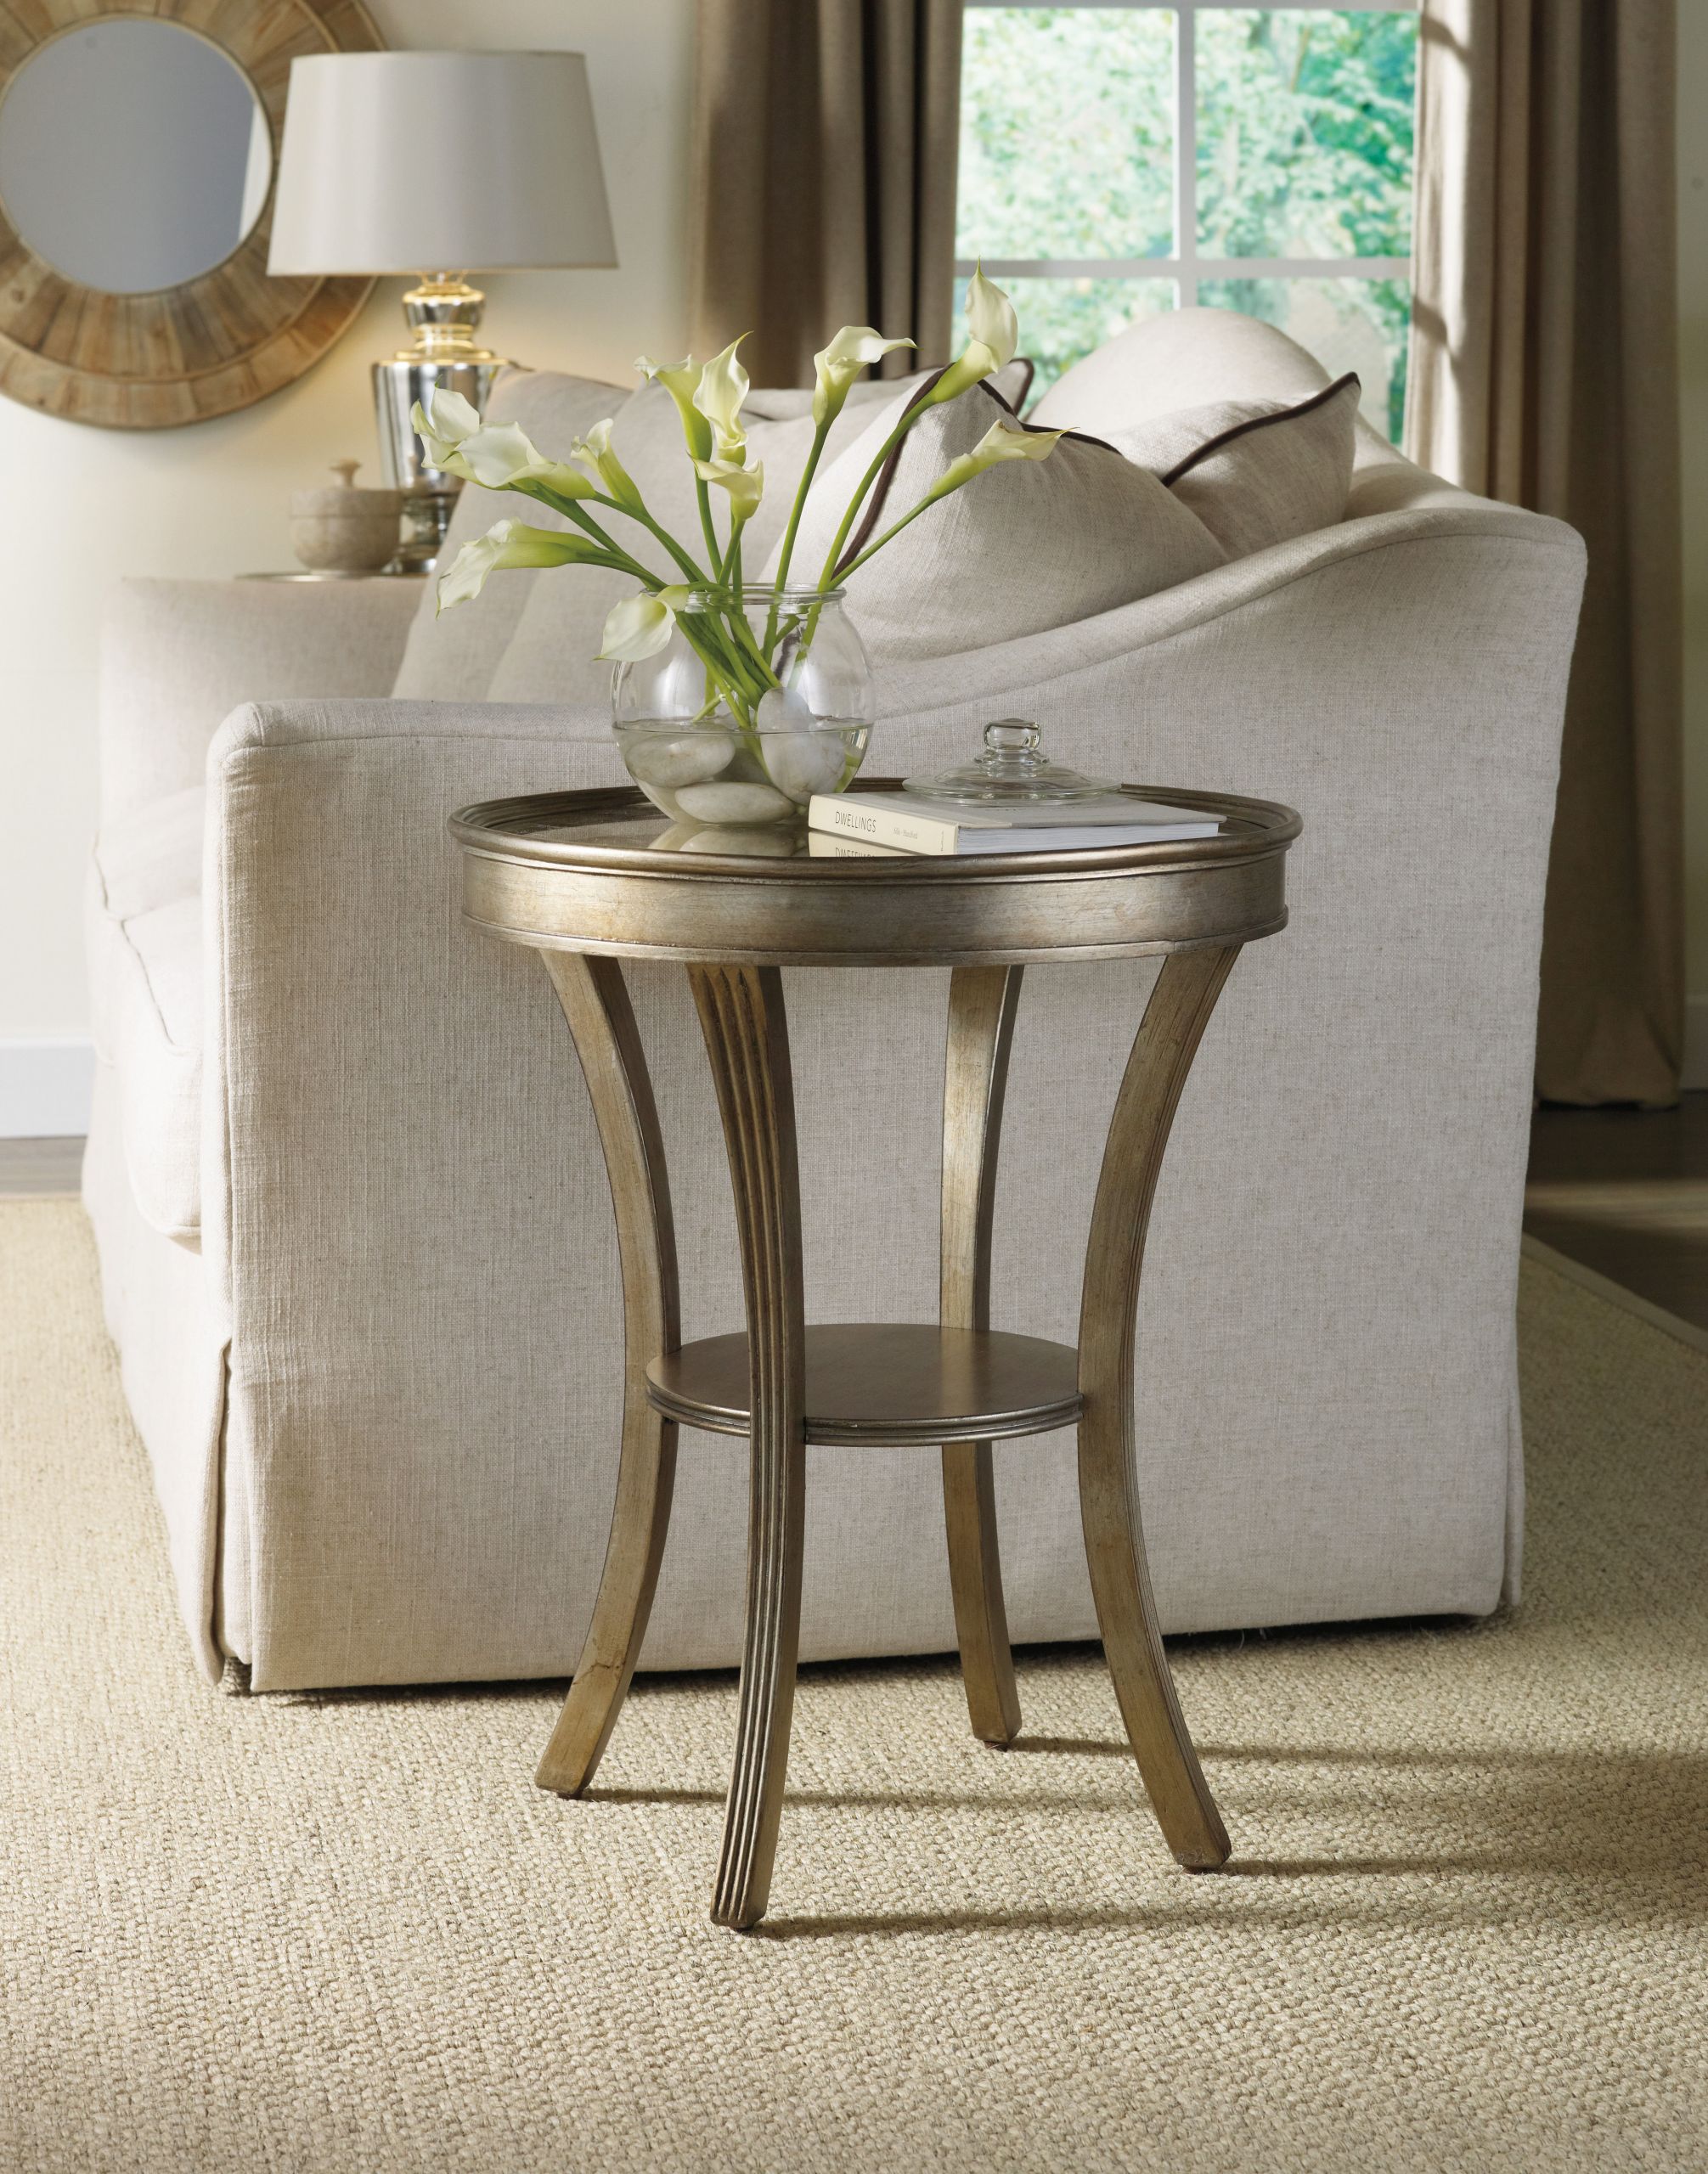 Accent Living Room Tables
 Hooker Furniture Living Room Sanctuary Round Mirrored